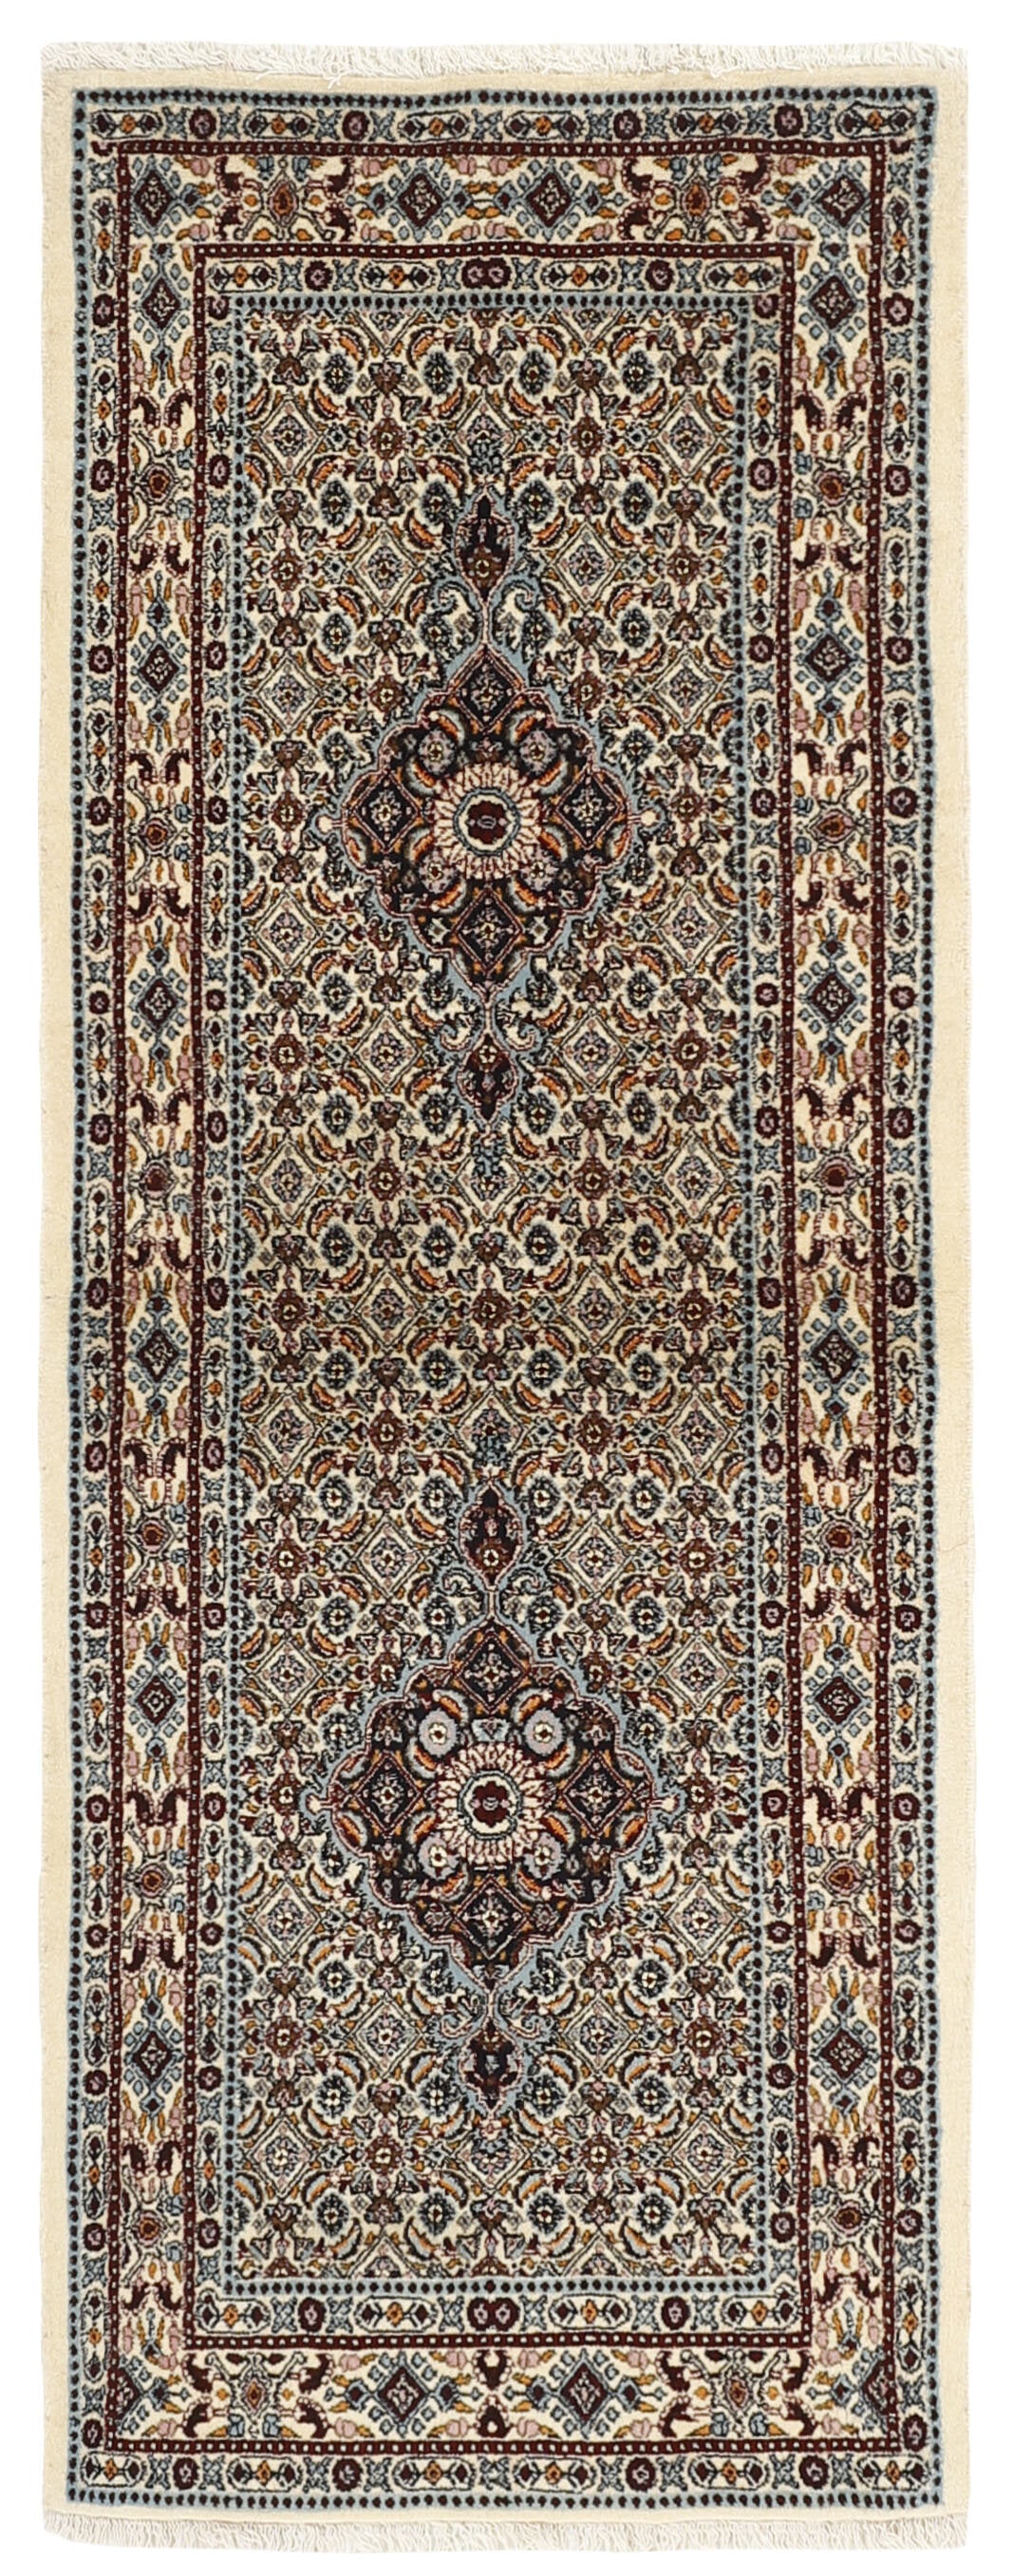 authentic persian runner with traditional floral pattern in red, pink, yellow, blue, green, beige, cream, brown and black